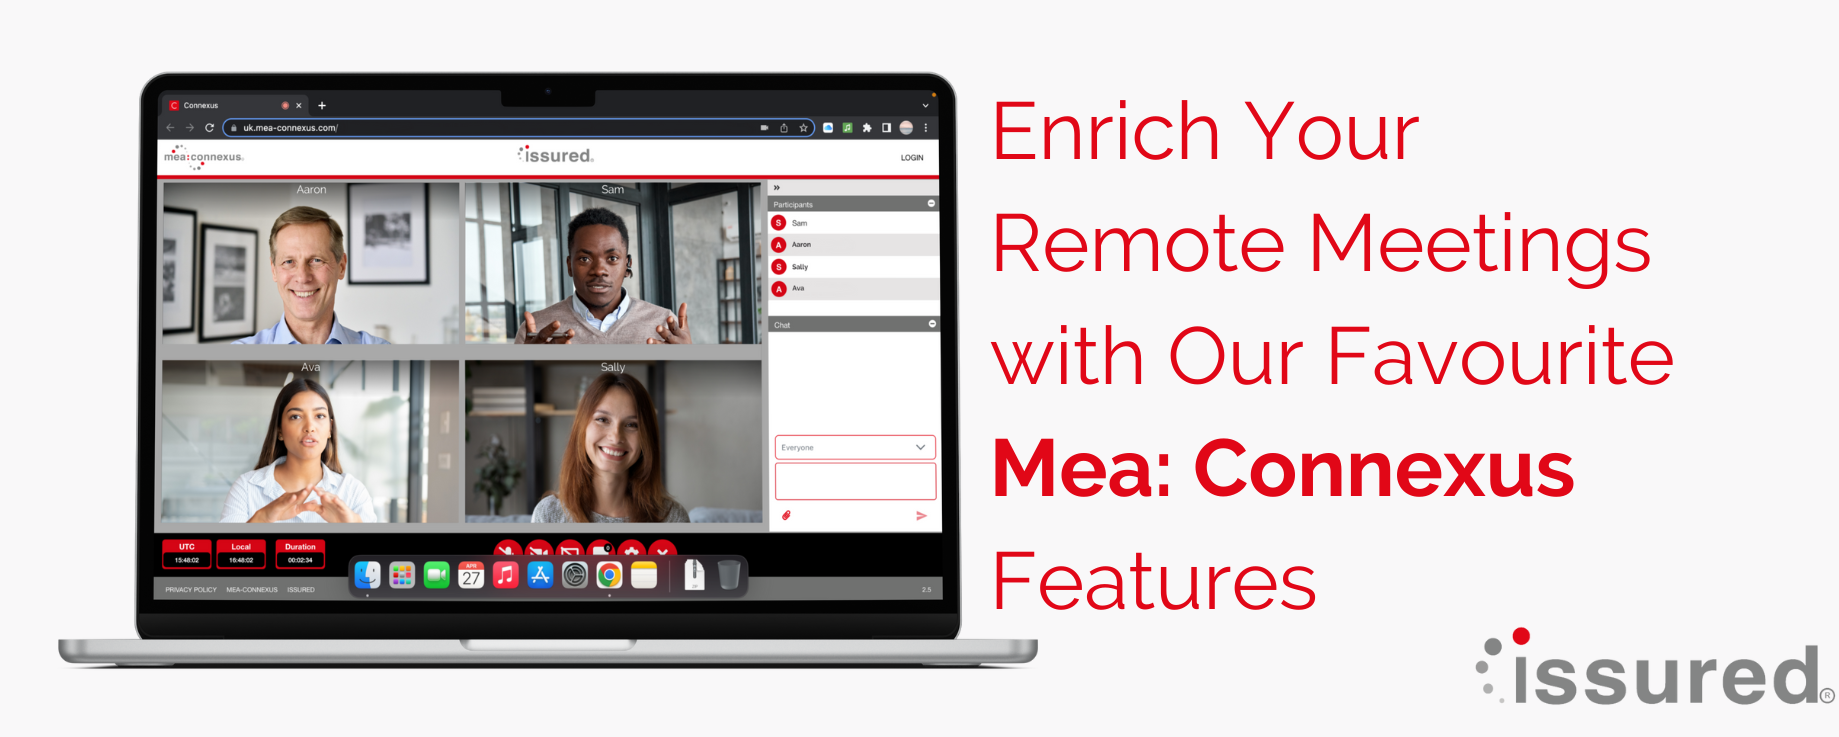 Enrich Your Remote Meetings with Our Favourite Mea: Connexus Features | Digital Transformation Specialists | Issured Ltd